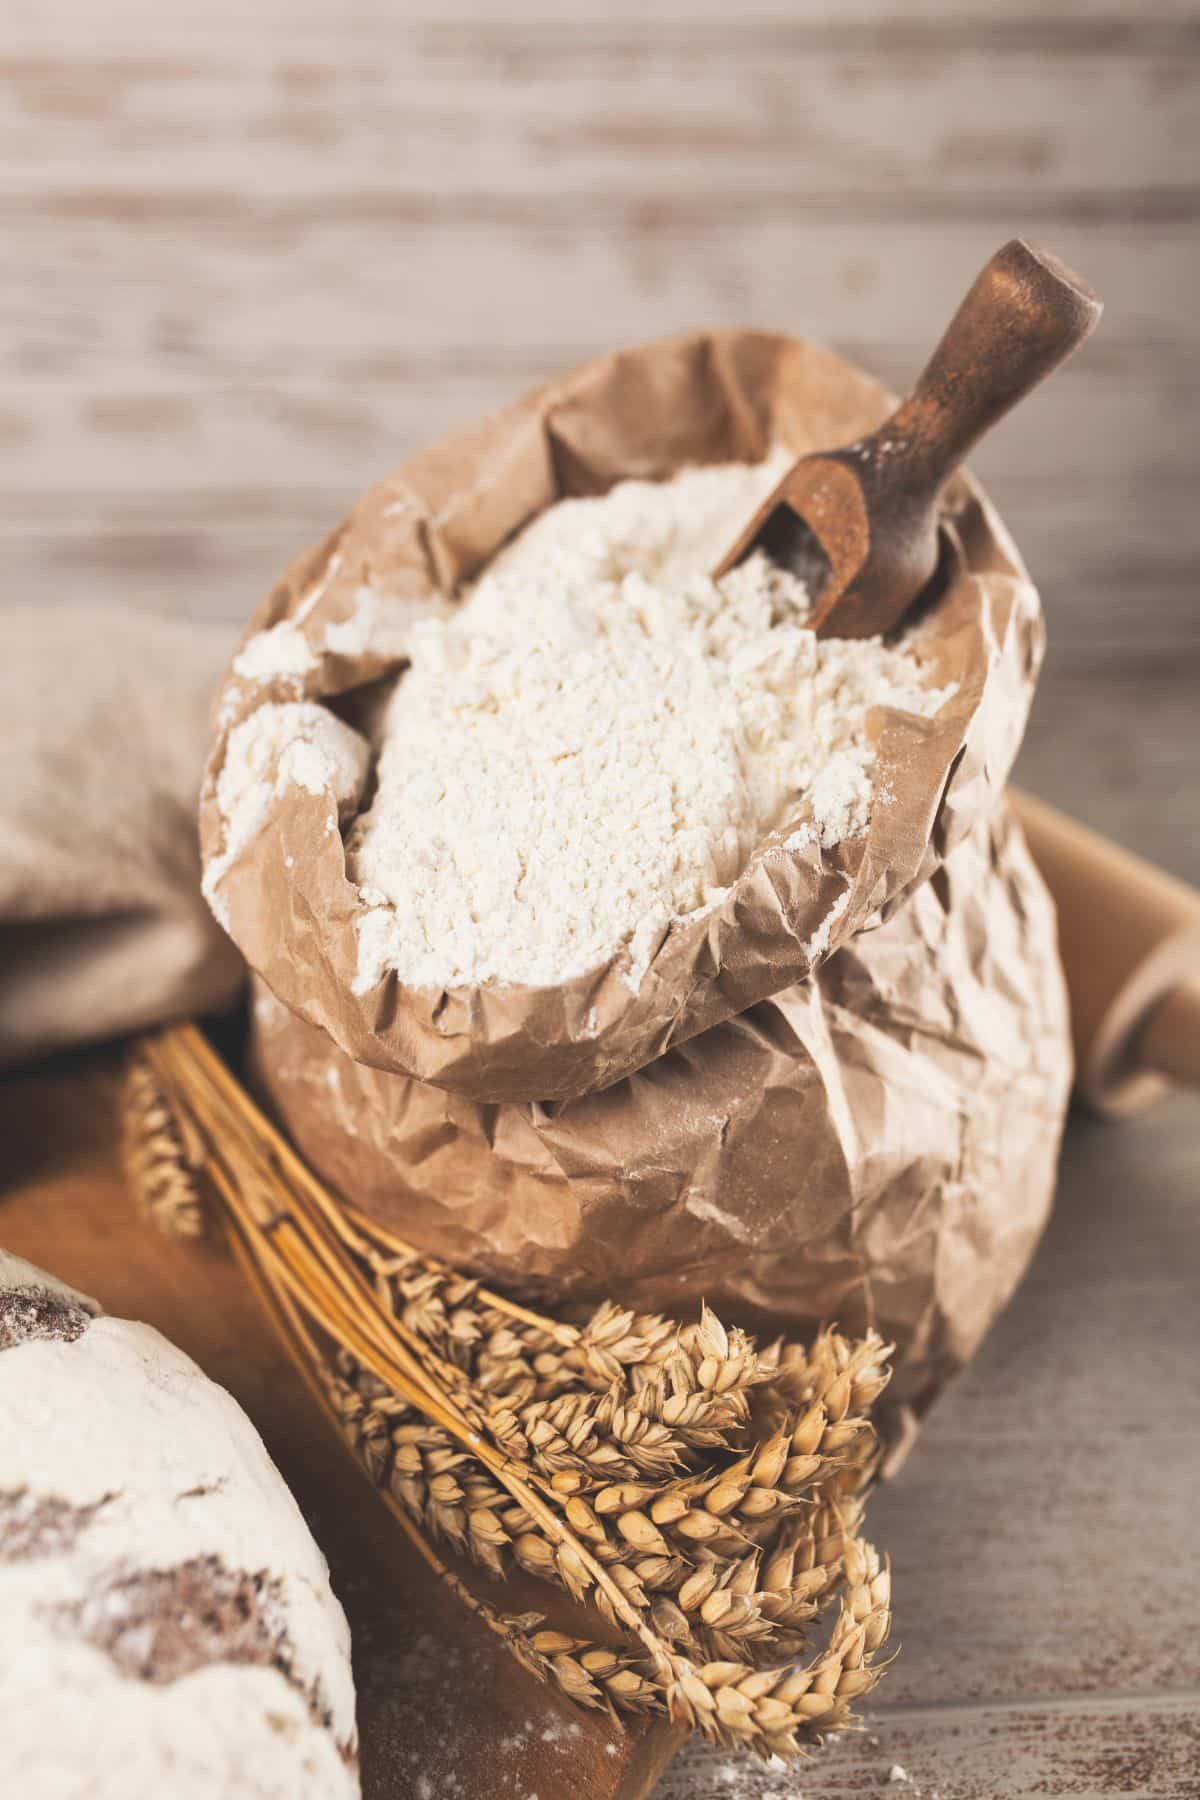 Bag of all-purpose flour with wheat on wooden surface.